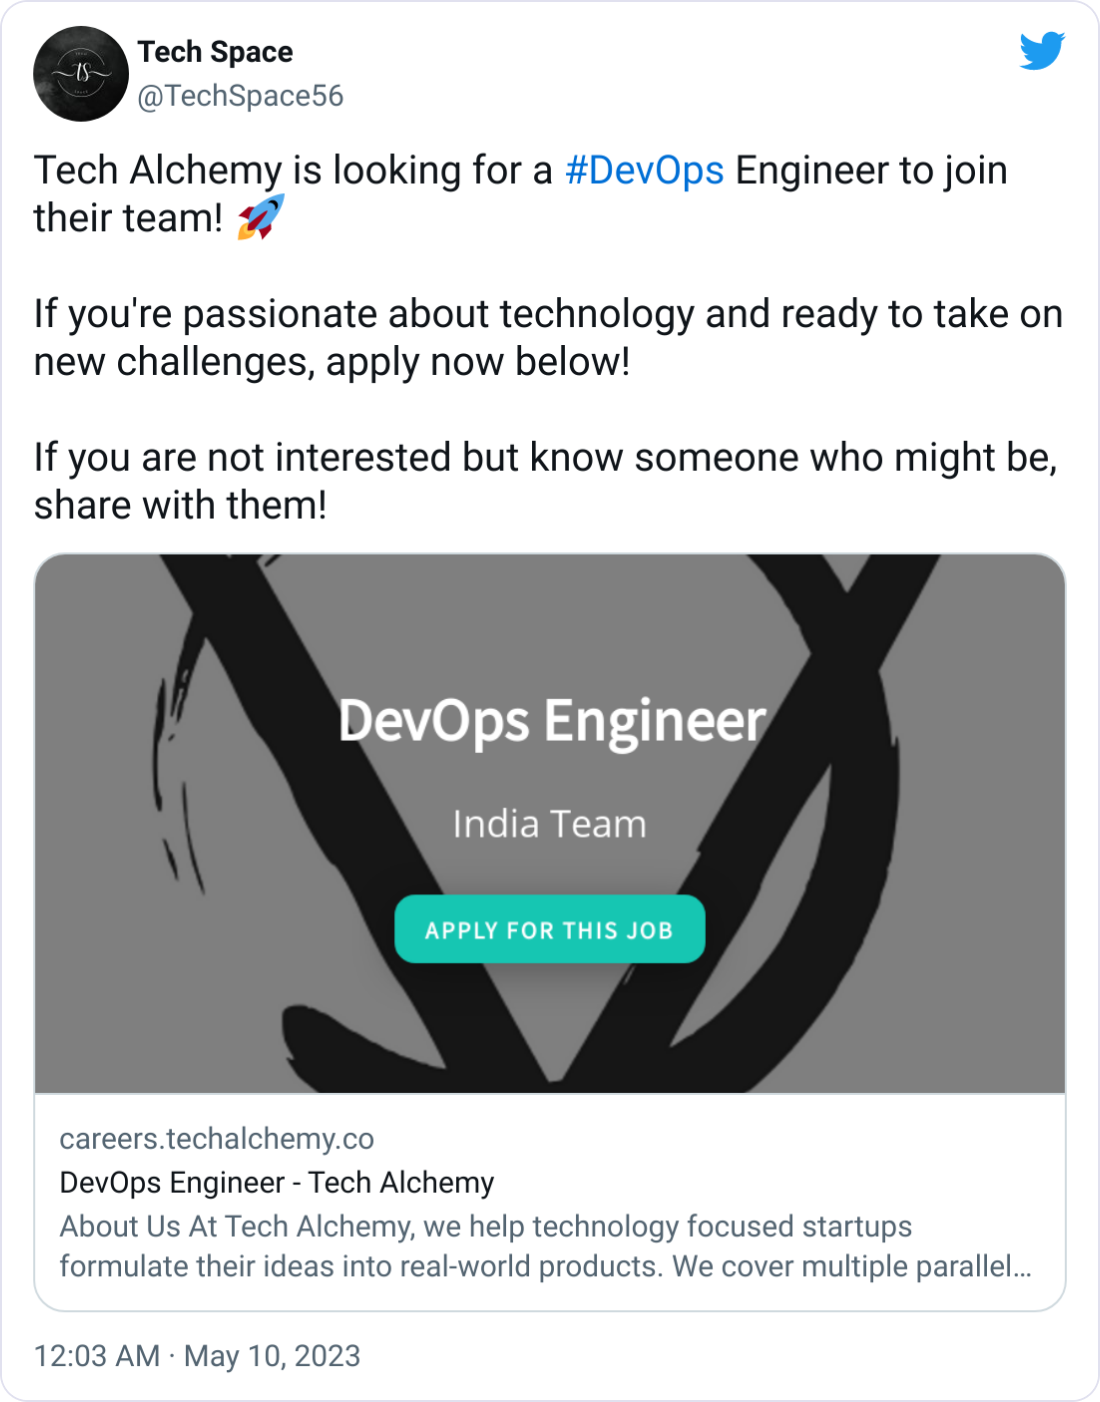  Tech Space @TechSpace56 Tech Alchemy is looking for a #DevOps Engineer to join their team! 🚀  If you're passionate about technology and ready to take on new challenges, apply now below!  If you are not interested but know someone who might be, share with them!